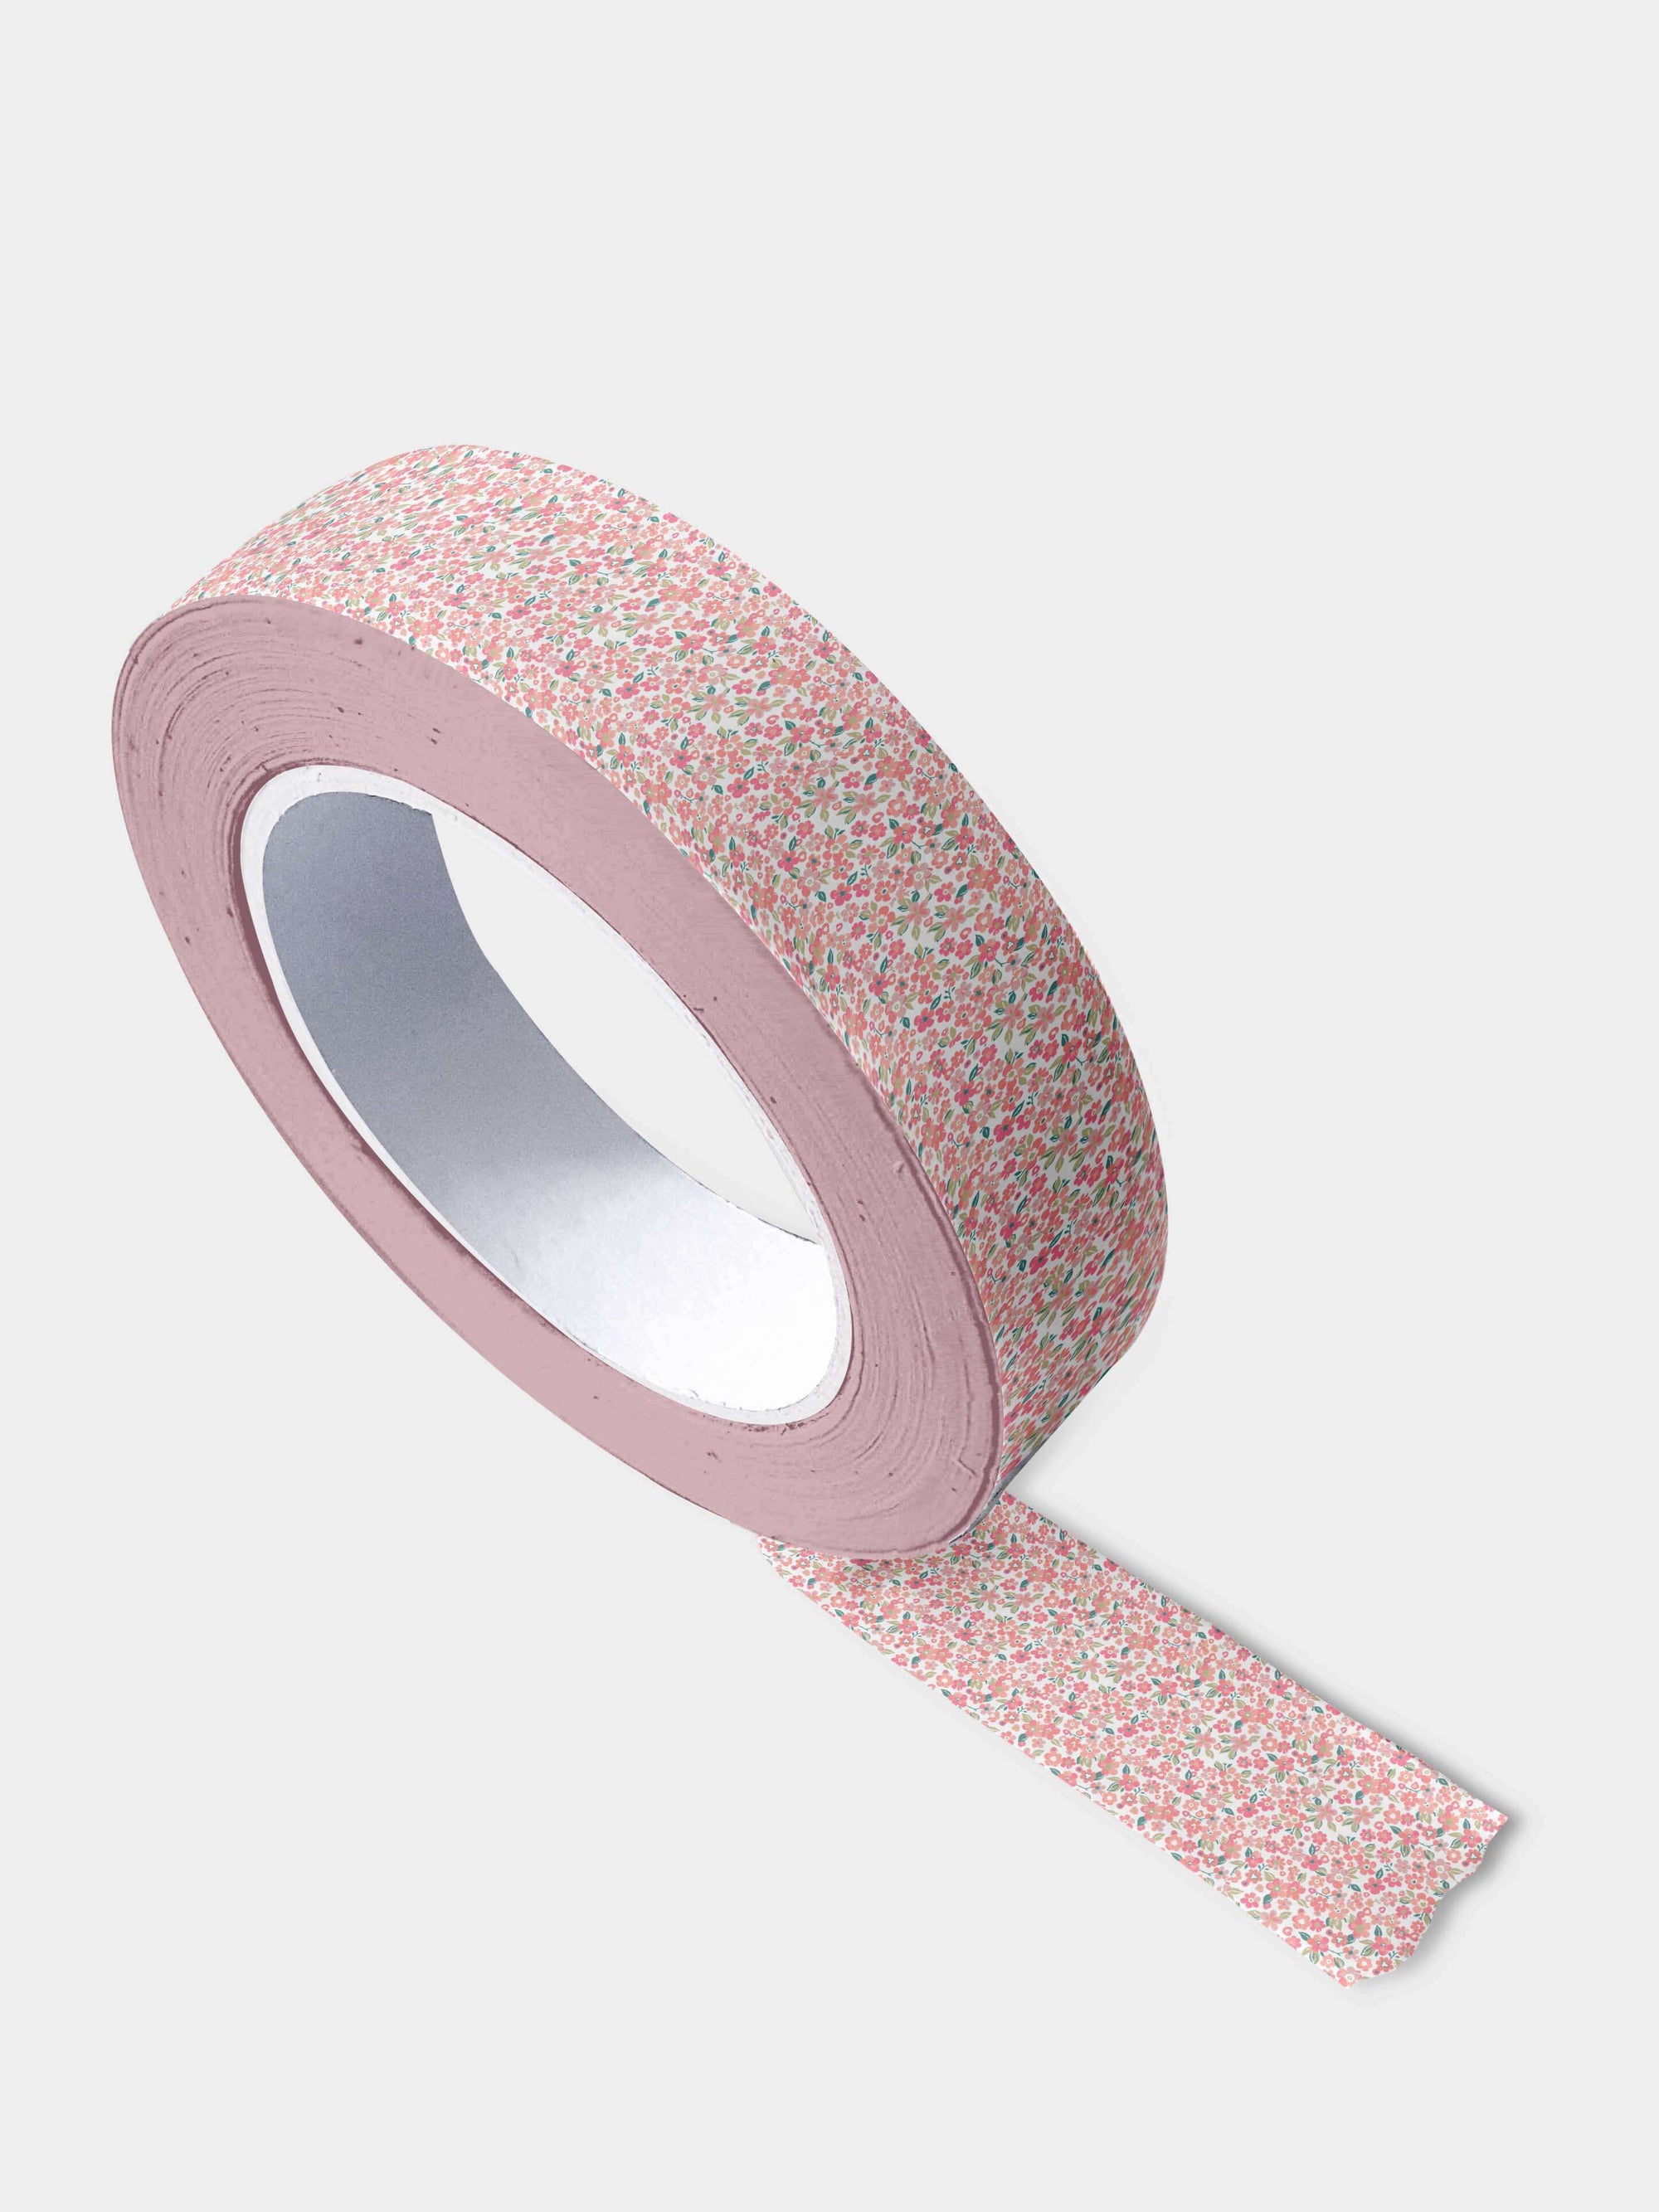 Washi-teip pastell blomster